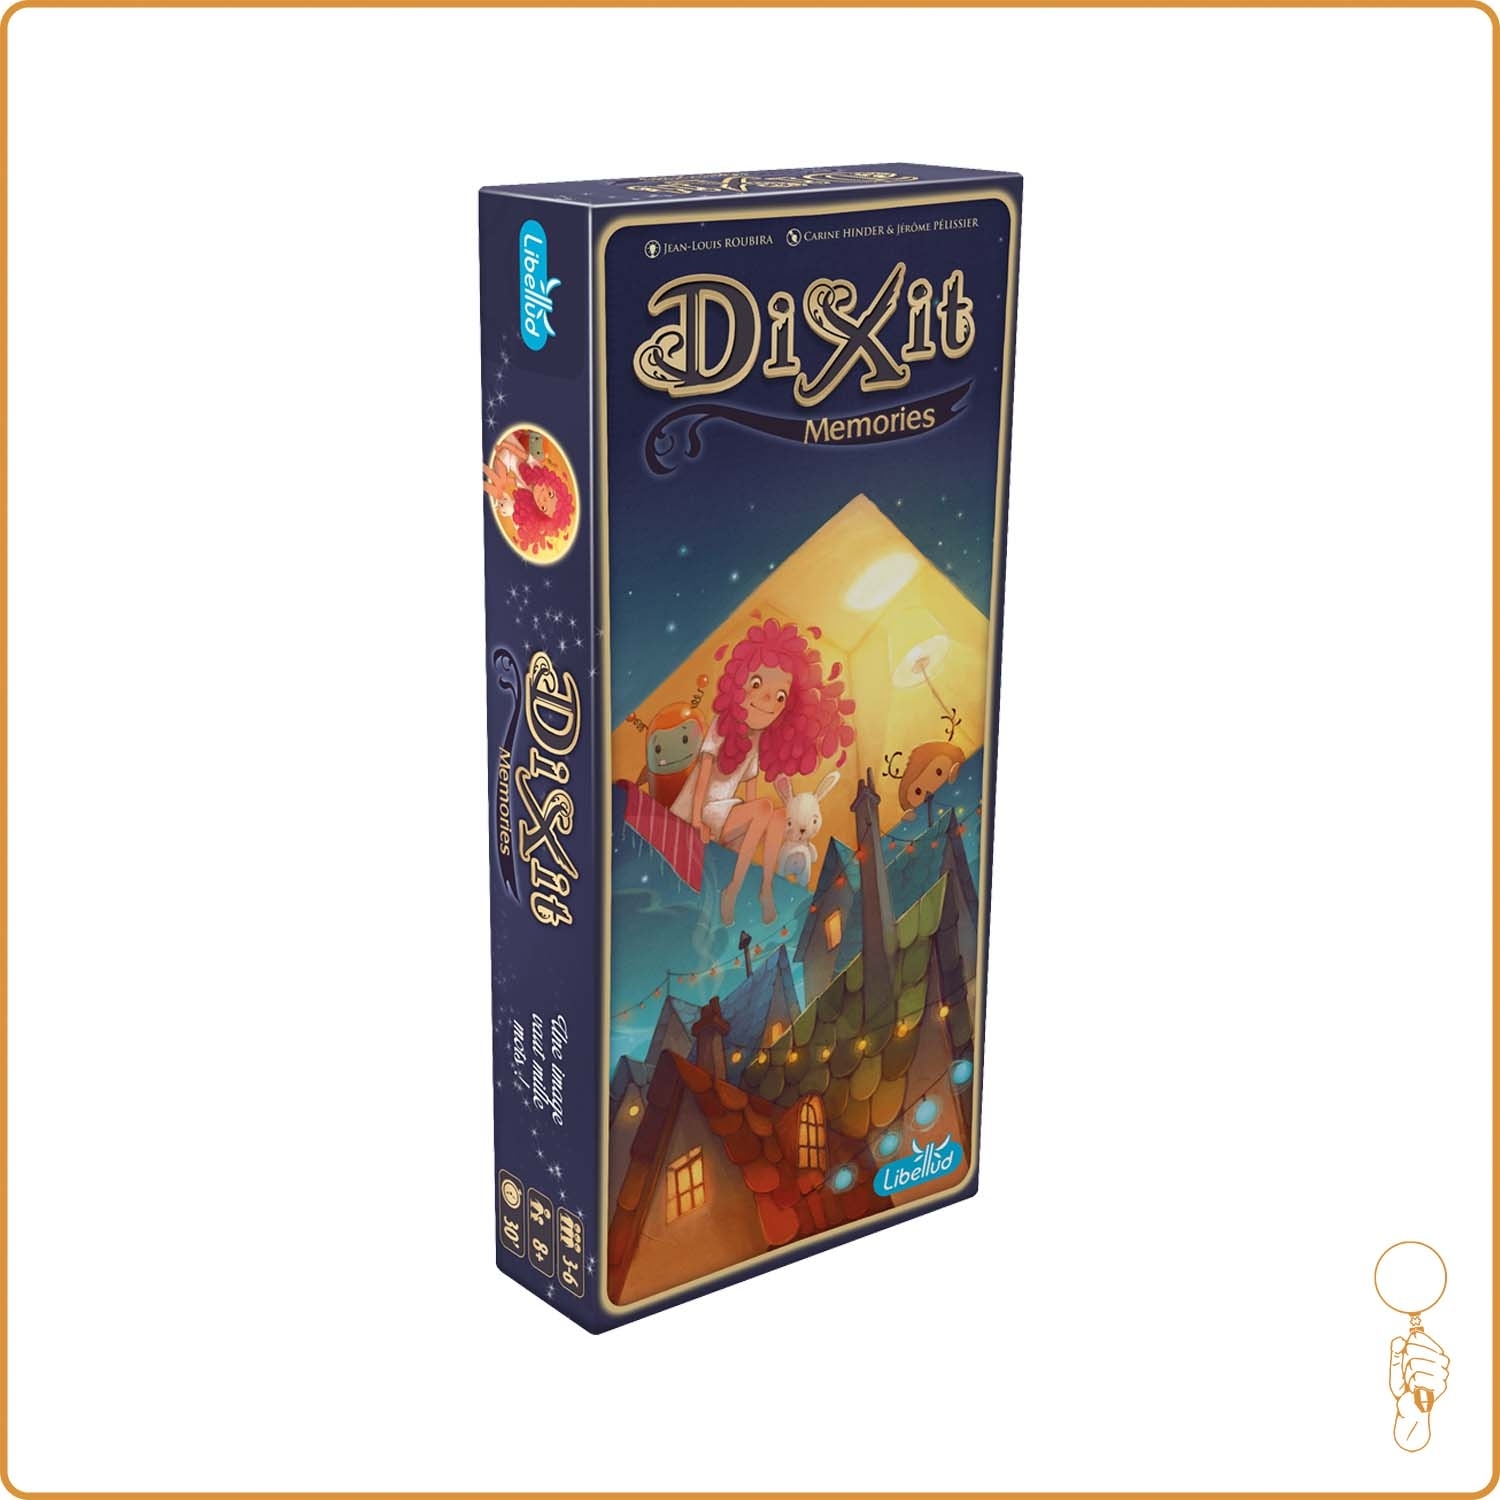 Gestion - Dixit - Extension 6 - Memories Libellud - 1